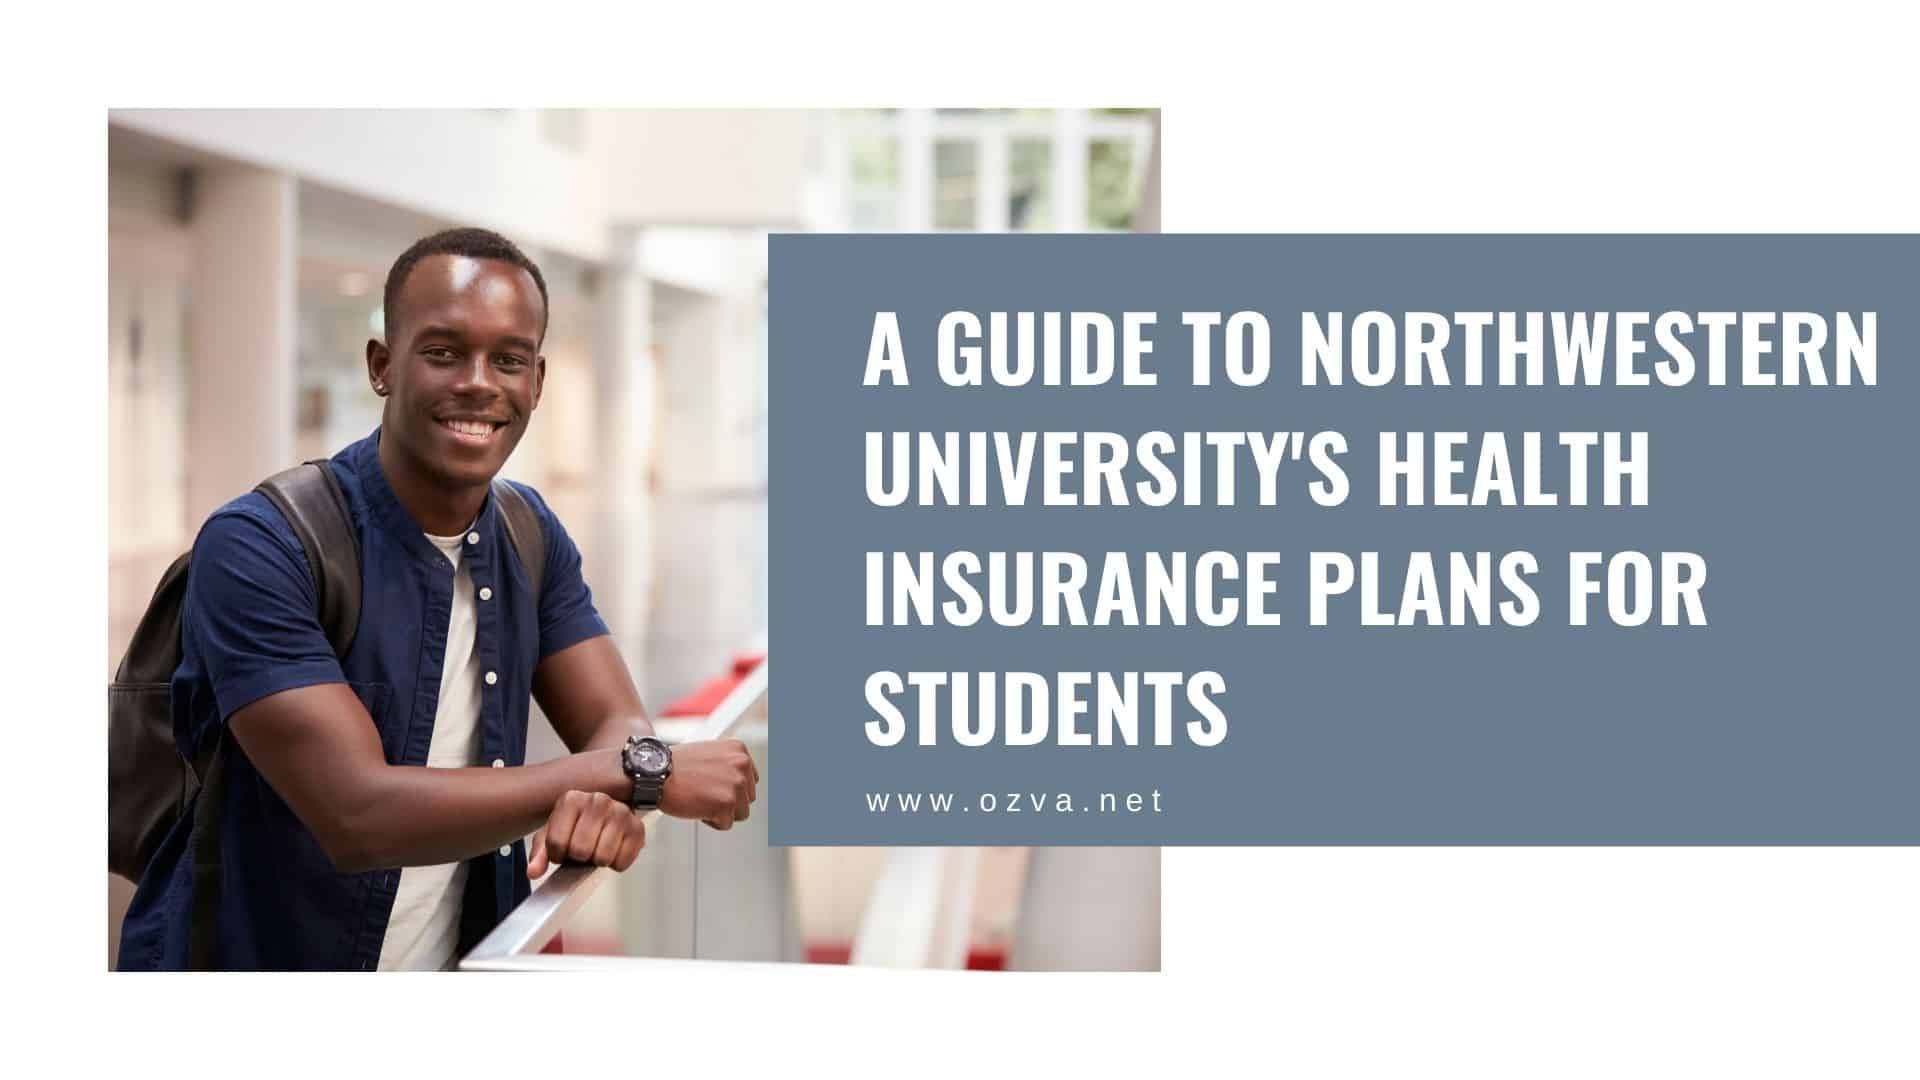 A Guide to Northwestern University's Health Insurance Plans for Students